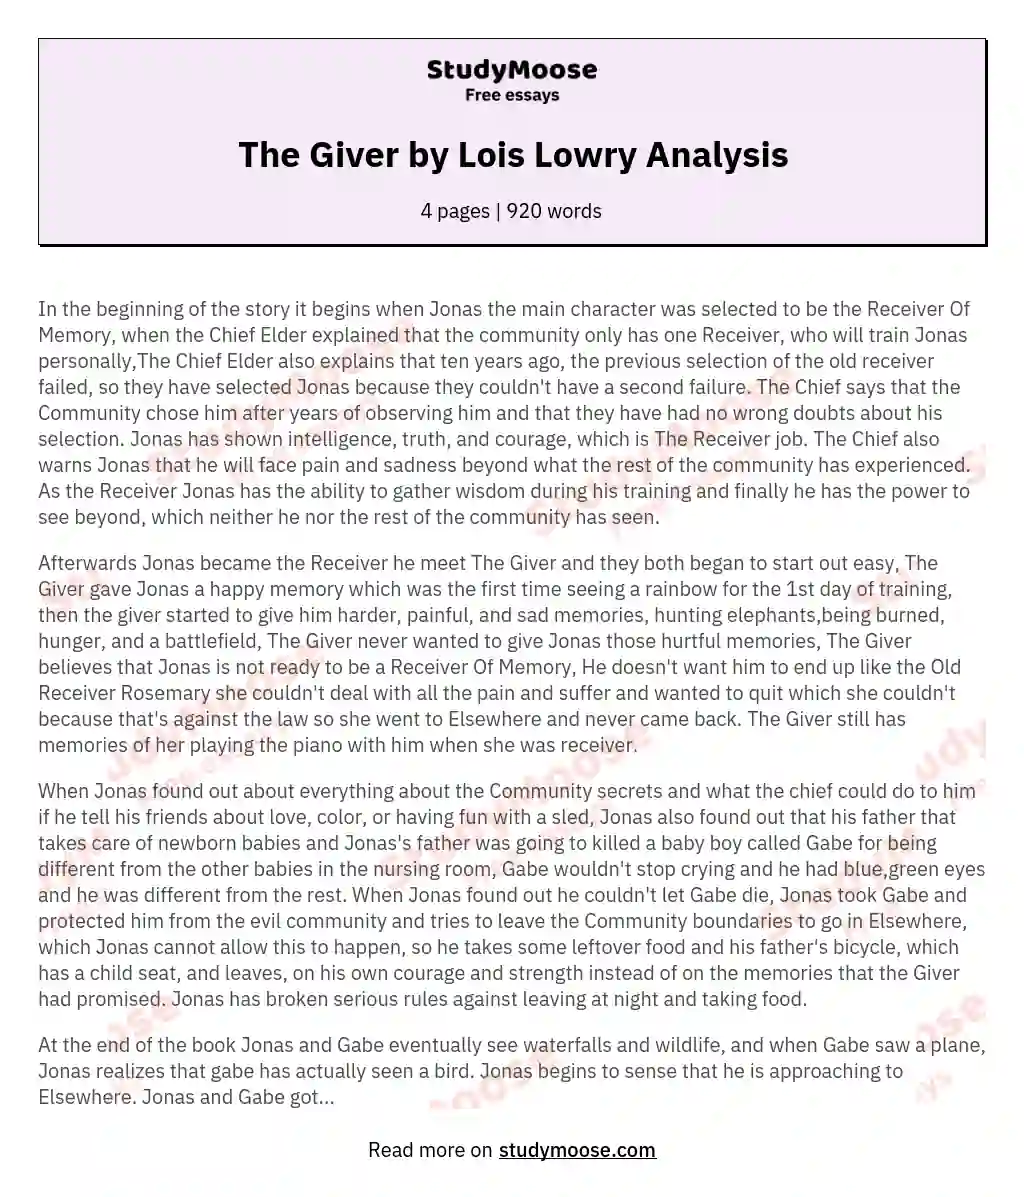 The Giver by Lois Lowry Analysis